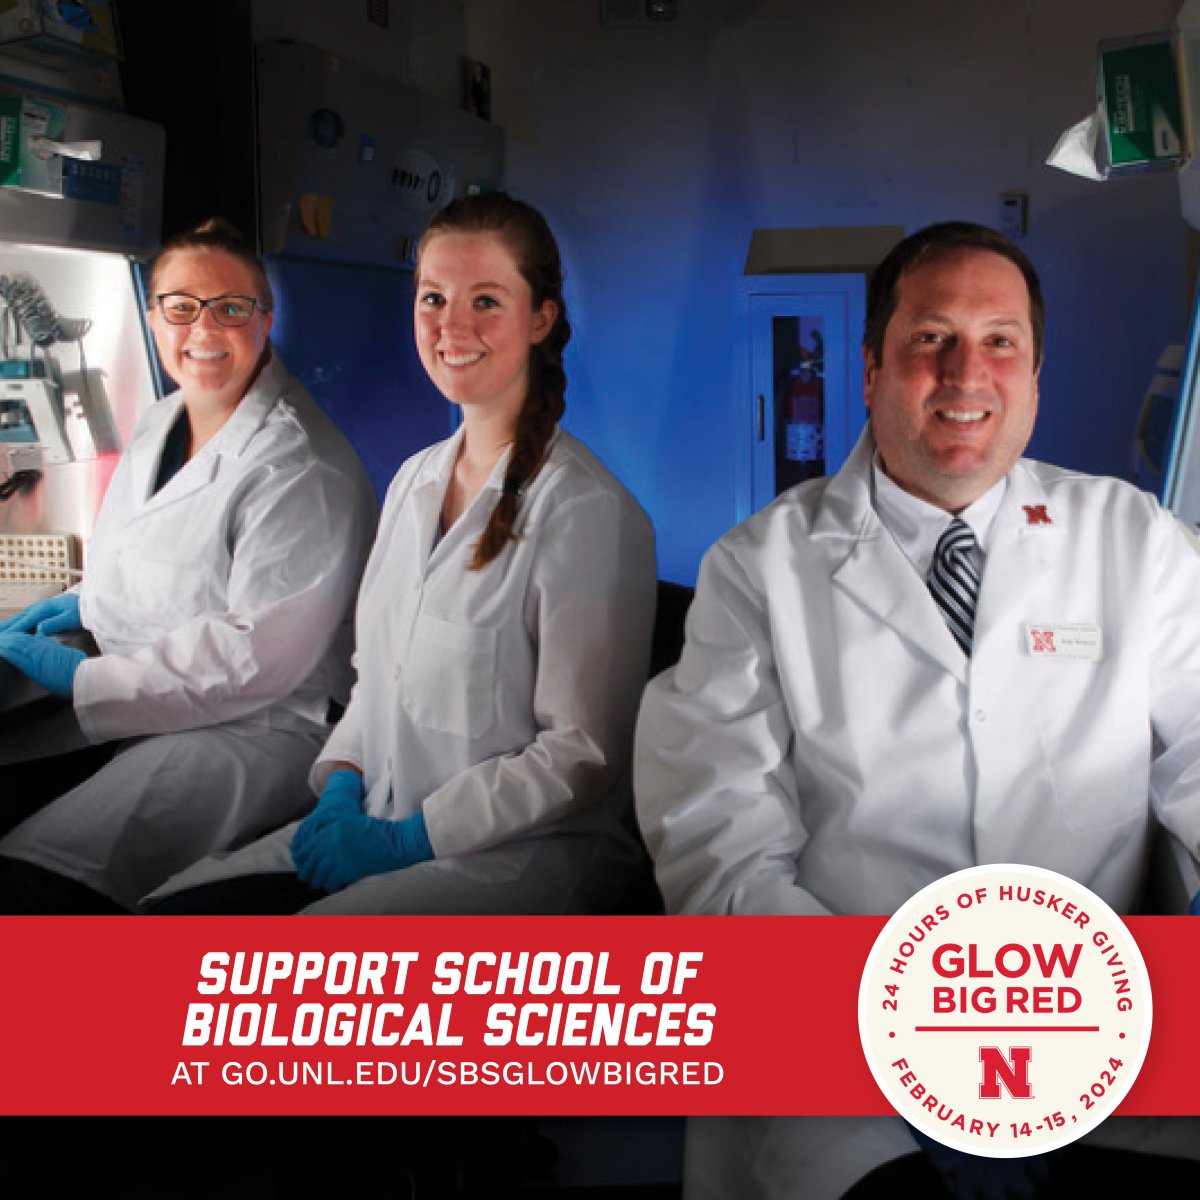 It's time for #GlowBigRed! Support our students by: ✅ giving ✅ sharing ✅ glowing go.unl.edu/sbsglowbigred @nebraskanfund @unlcas